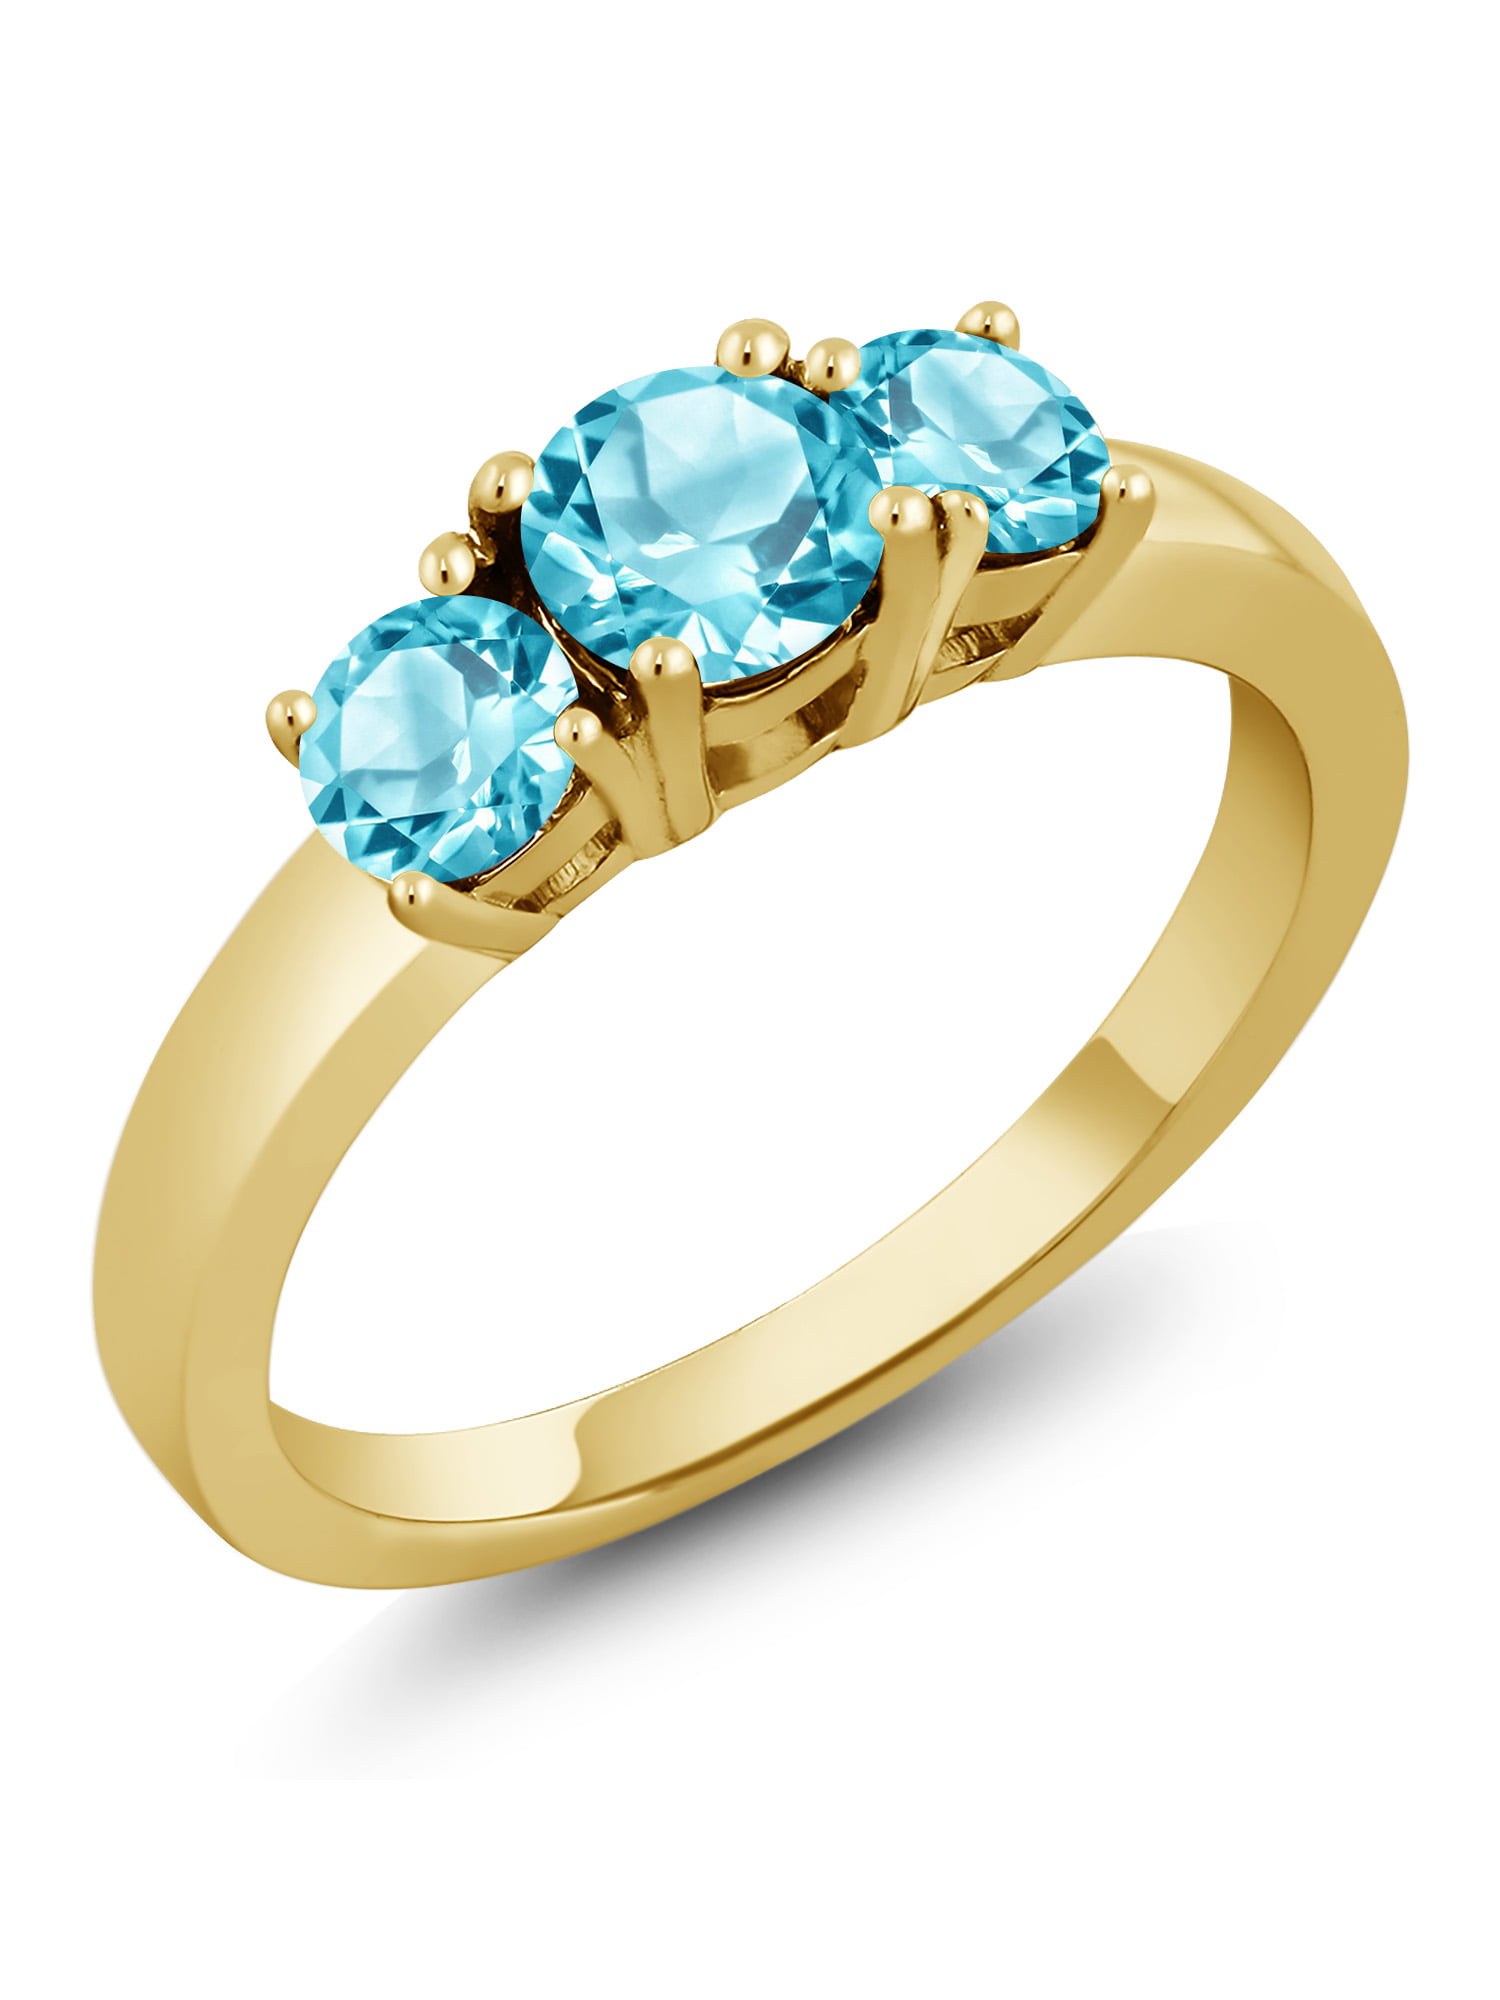 Gem Stone King 1.26 Ct Round Swiss Blue Topaz 925 Yellow Gold Plated Silver Ring 